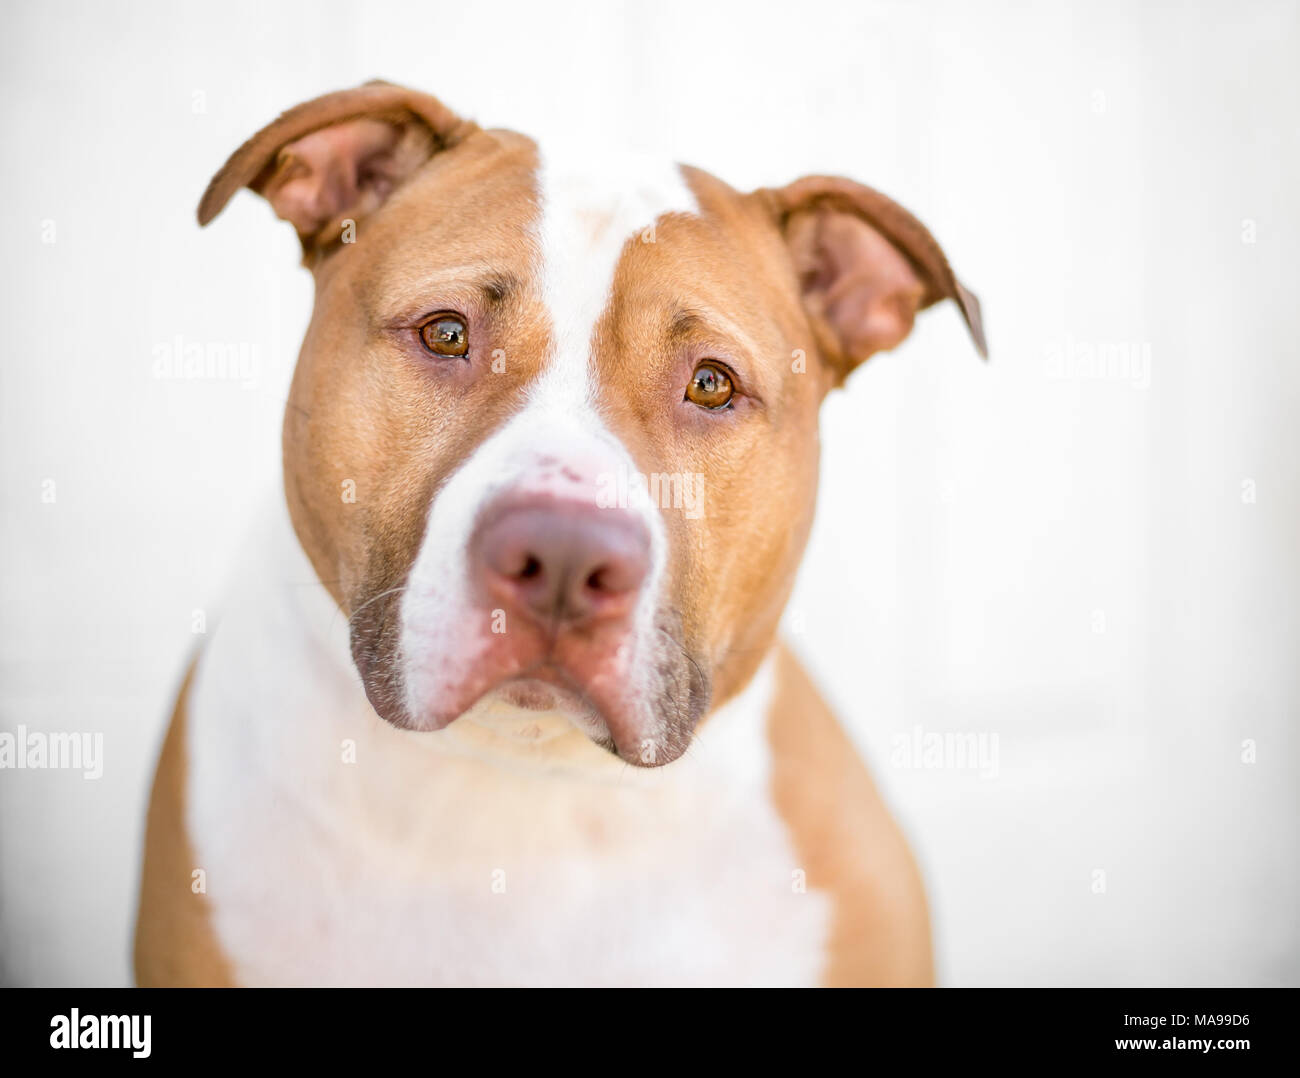 A red and white Pit Bull mixed breed dog with a sad expression Stock Photo